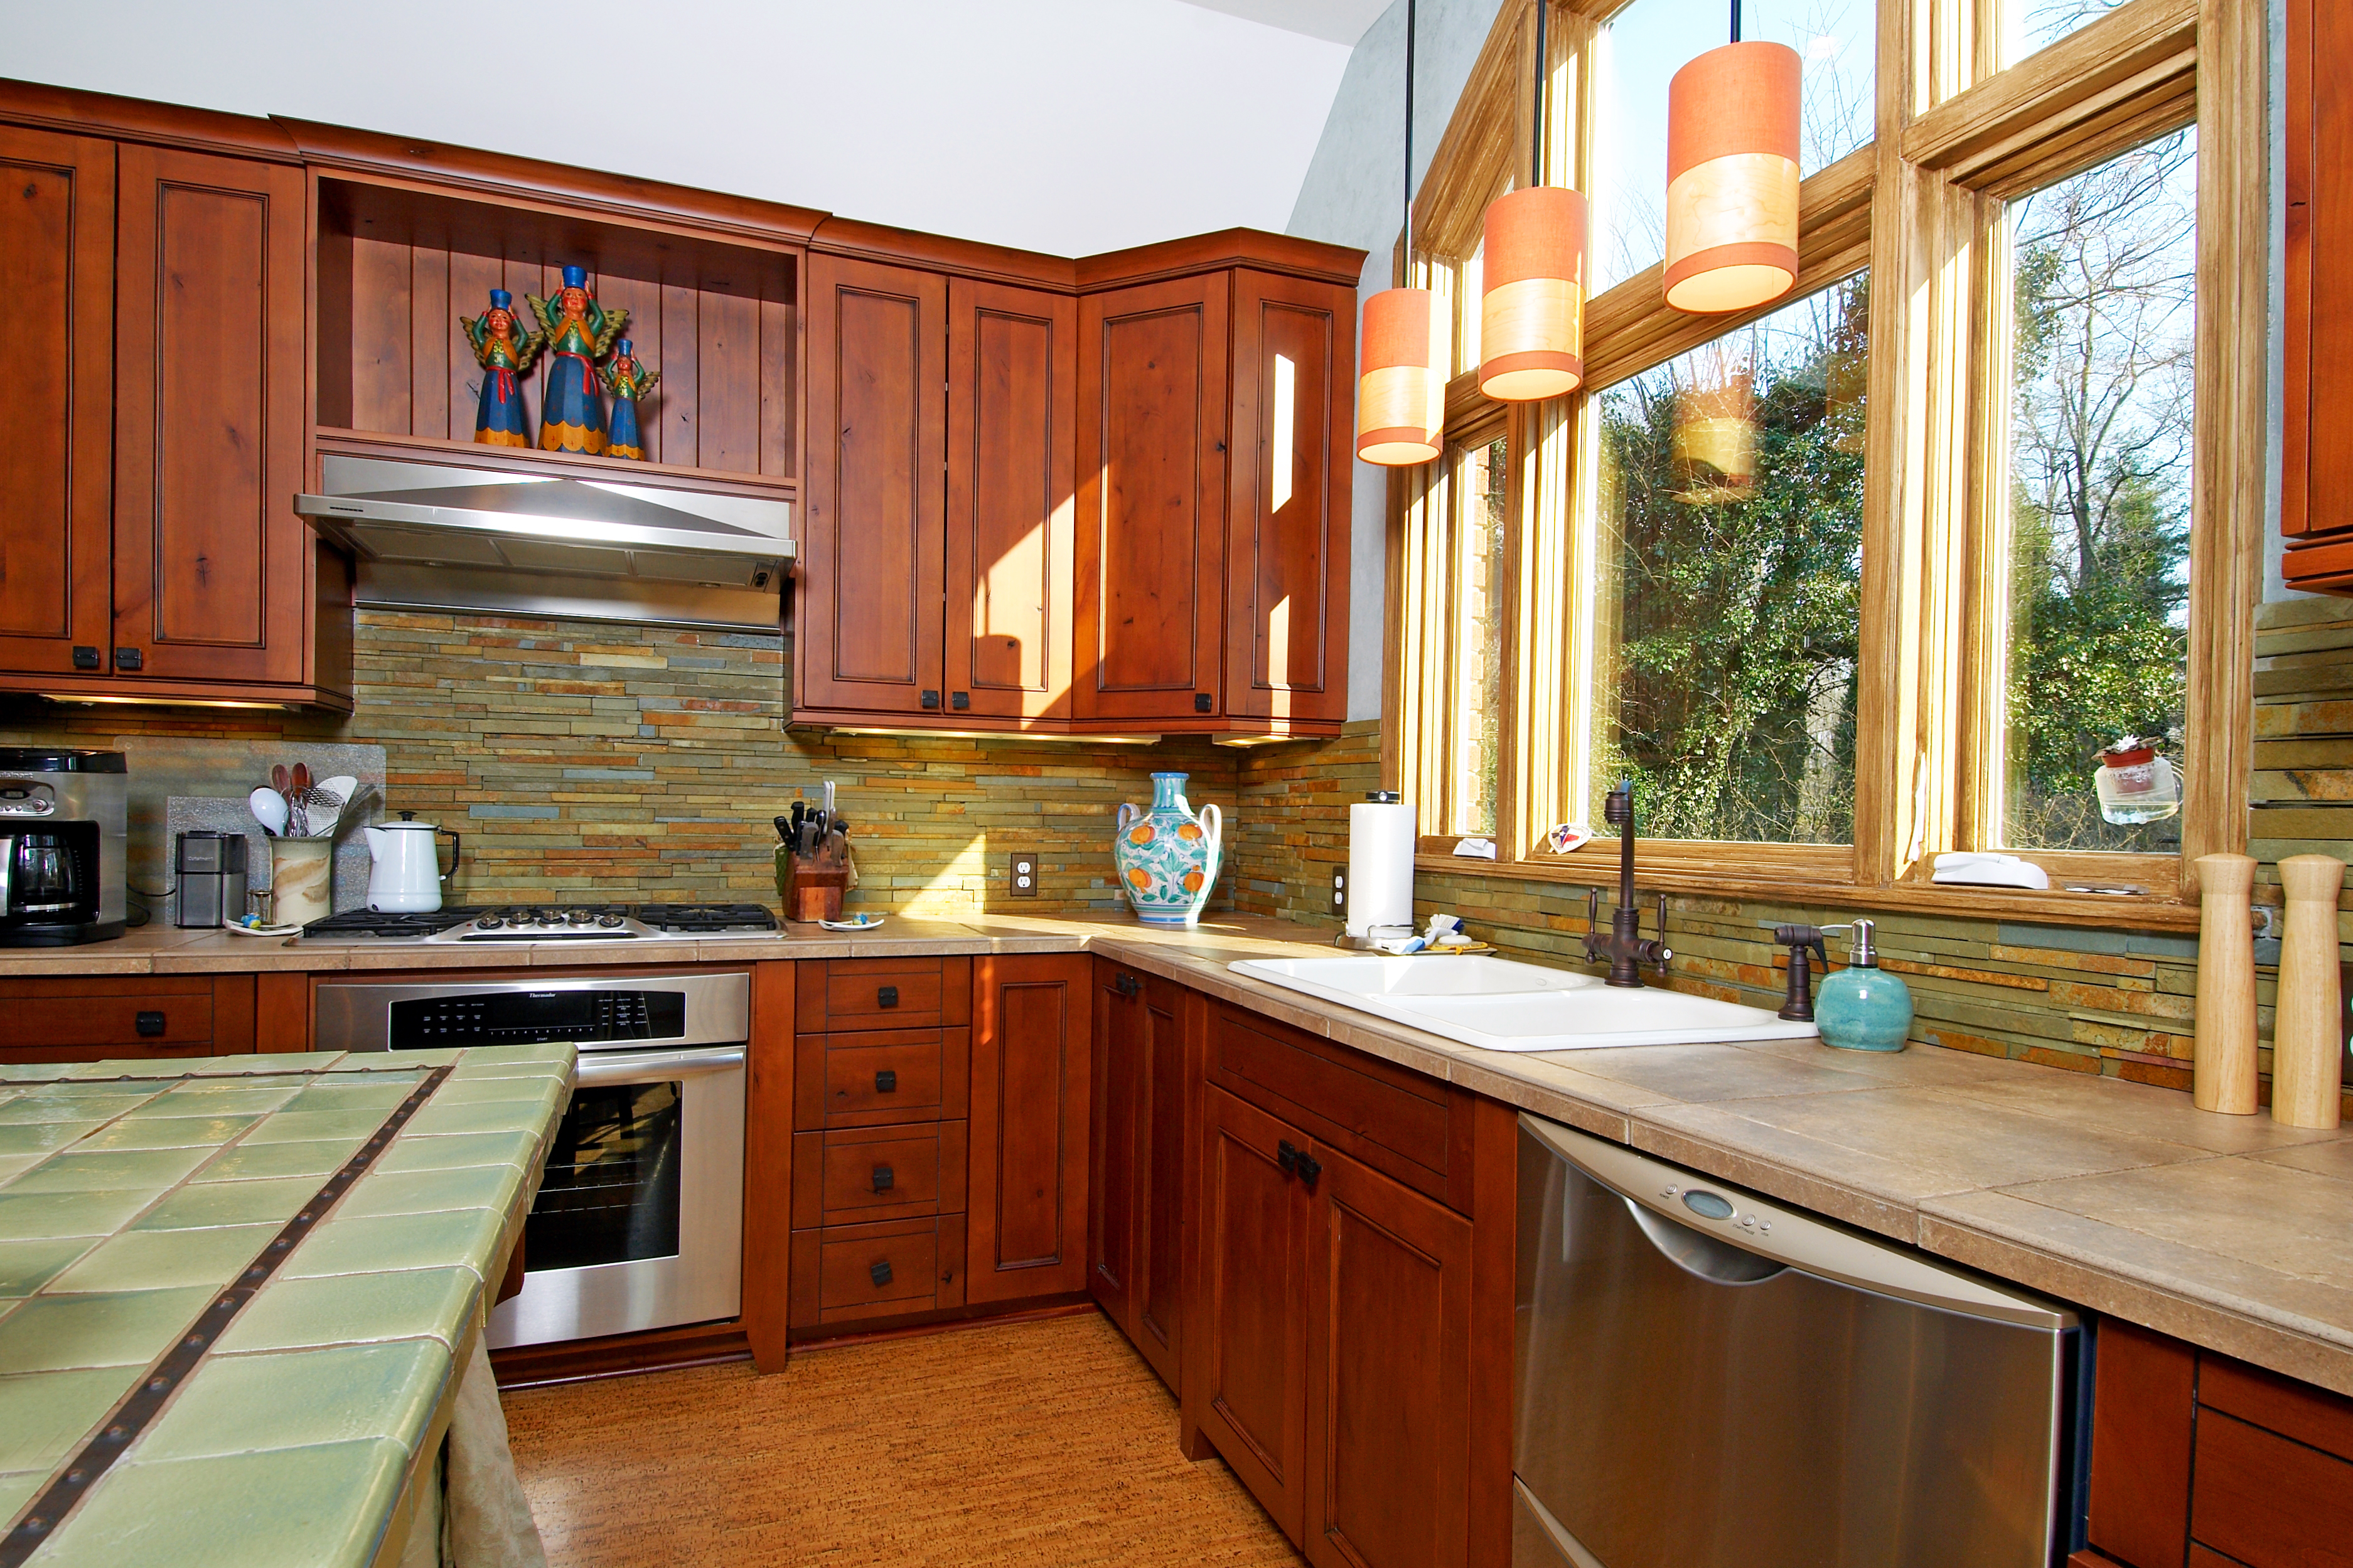 Different kinds of tile were used in this kitchen